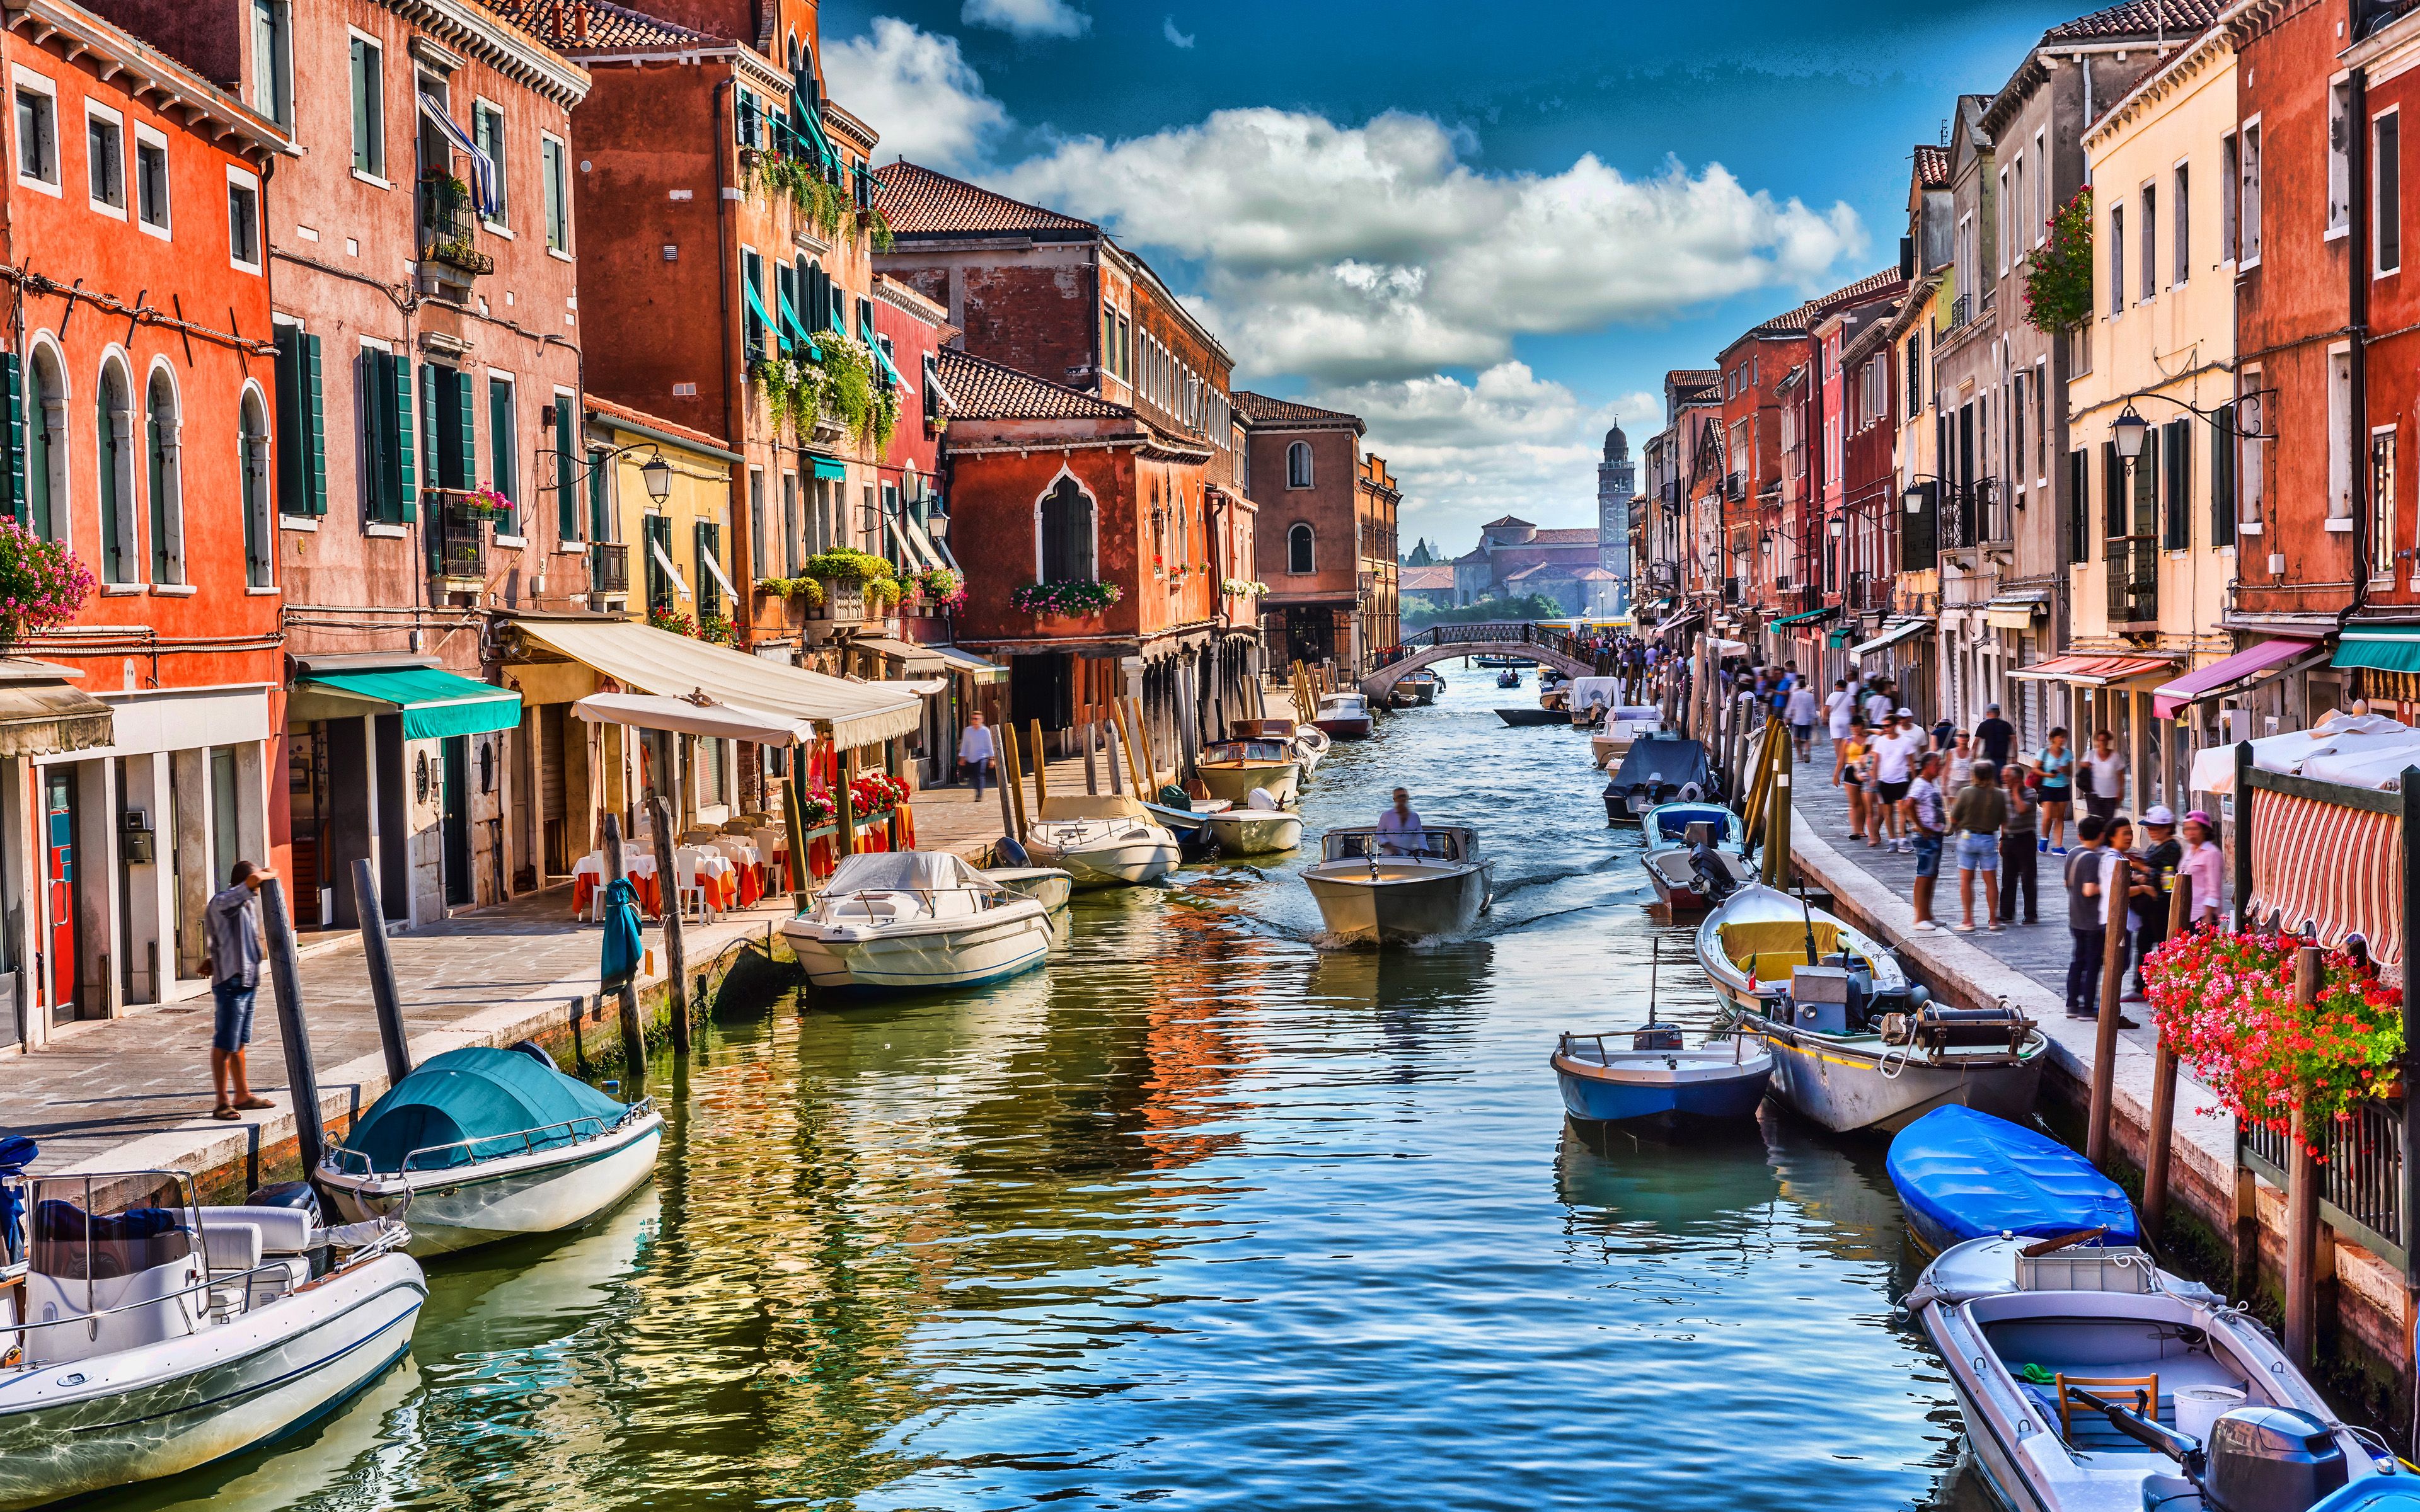 Download wallpaper Venice, 4k, italian cities, venetian canals, boats, summer, Italy, Europe, italian landmarks for desktop with resolution 3840x2400. High Quality HD picture wallpaper